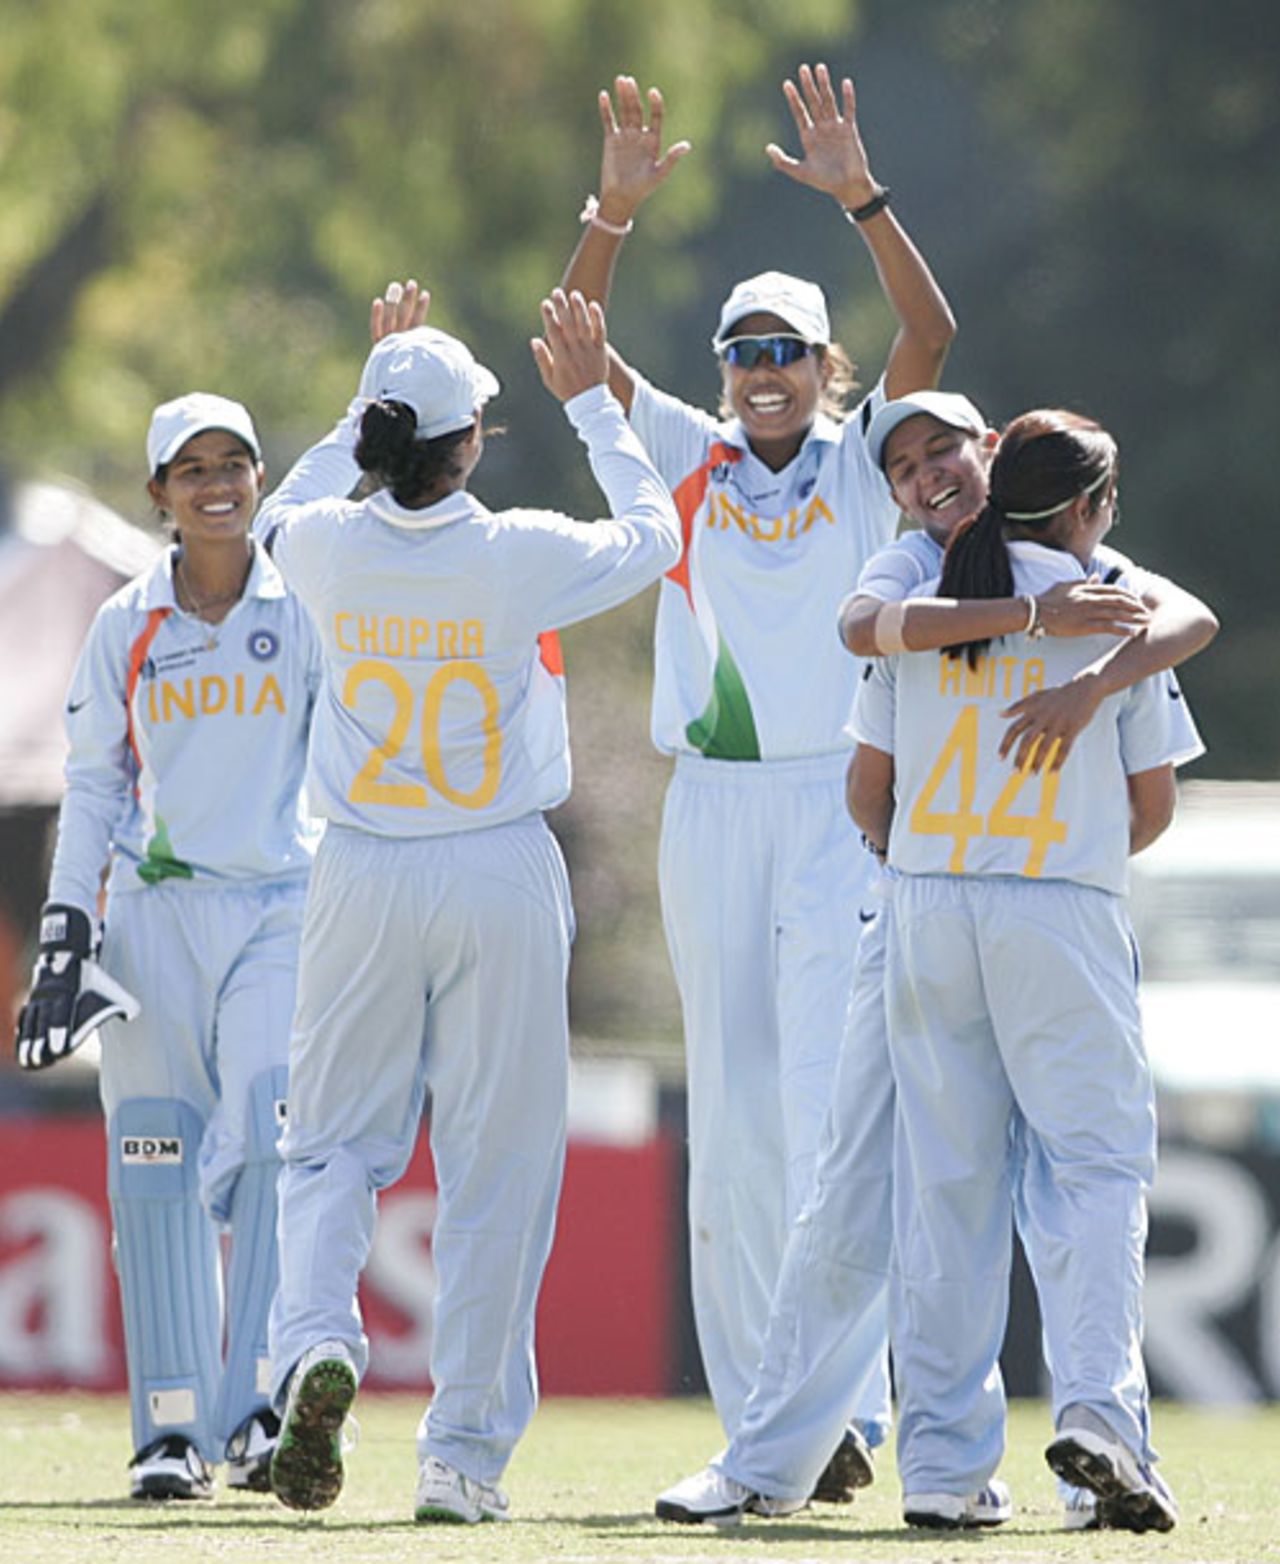 Indian players celebrate a wicket, India v Pakistan, Group B, women's World Cup, Bradman Oval, March 7, 2009